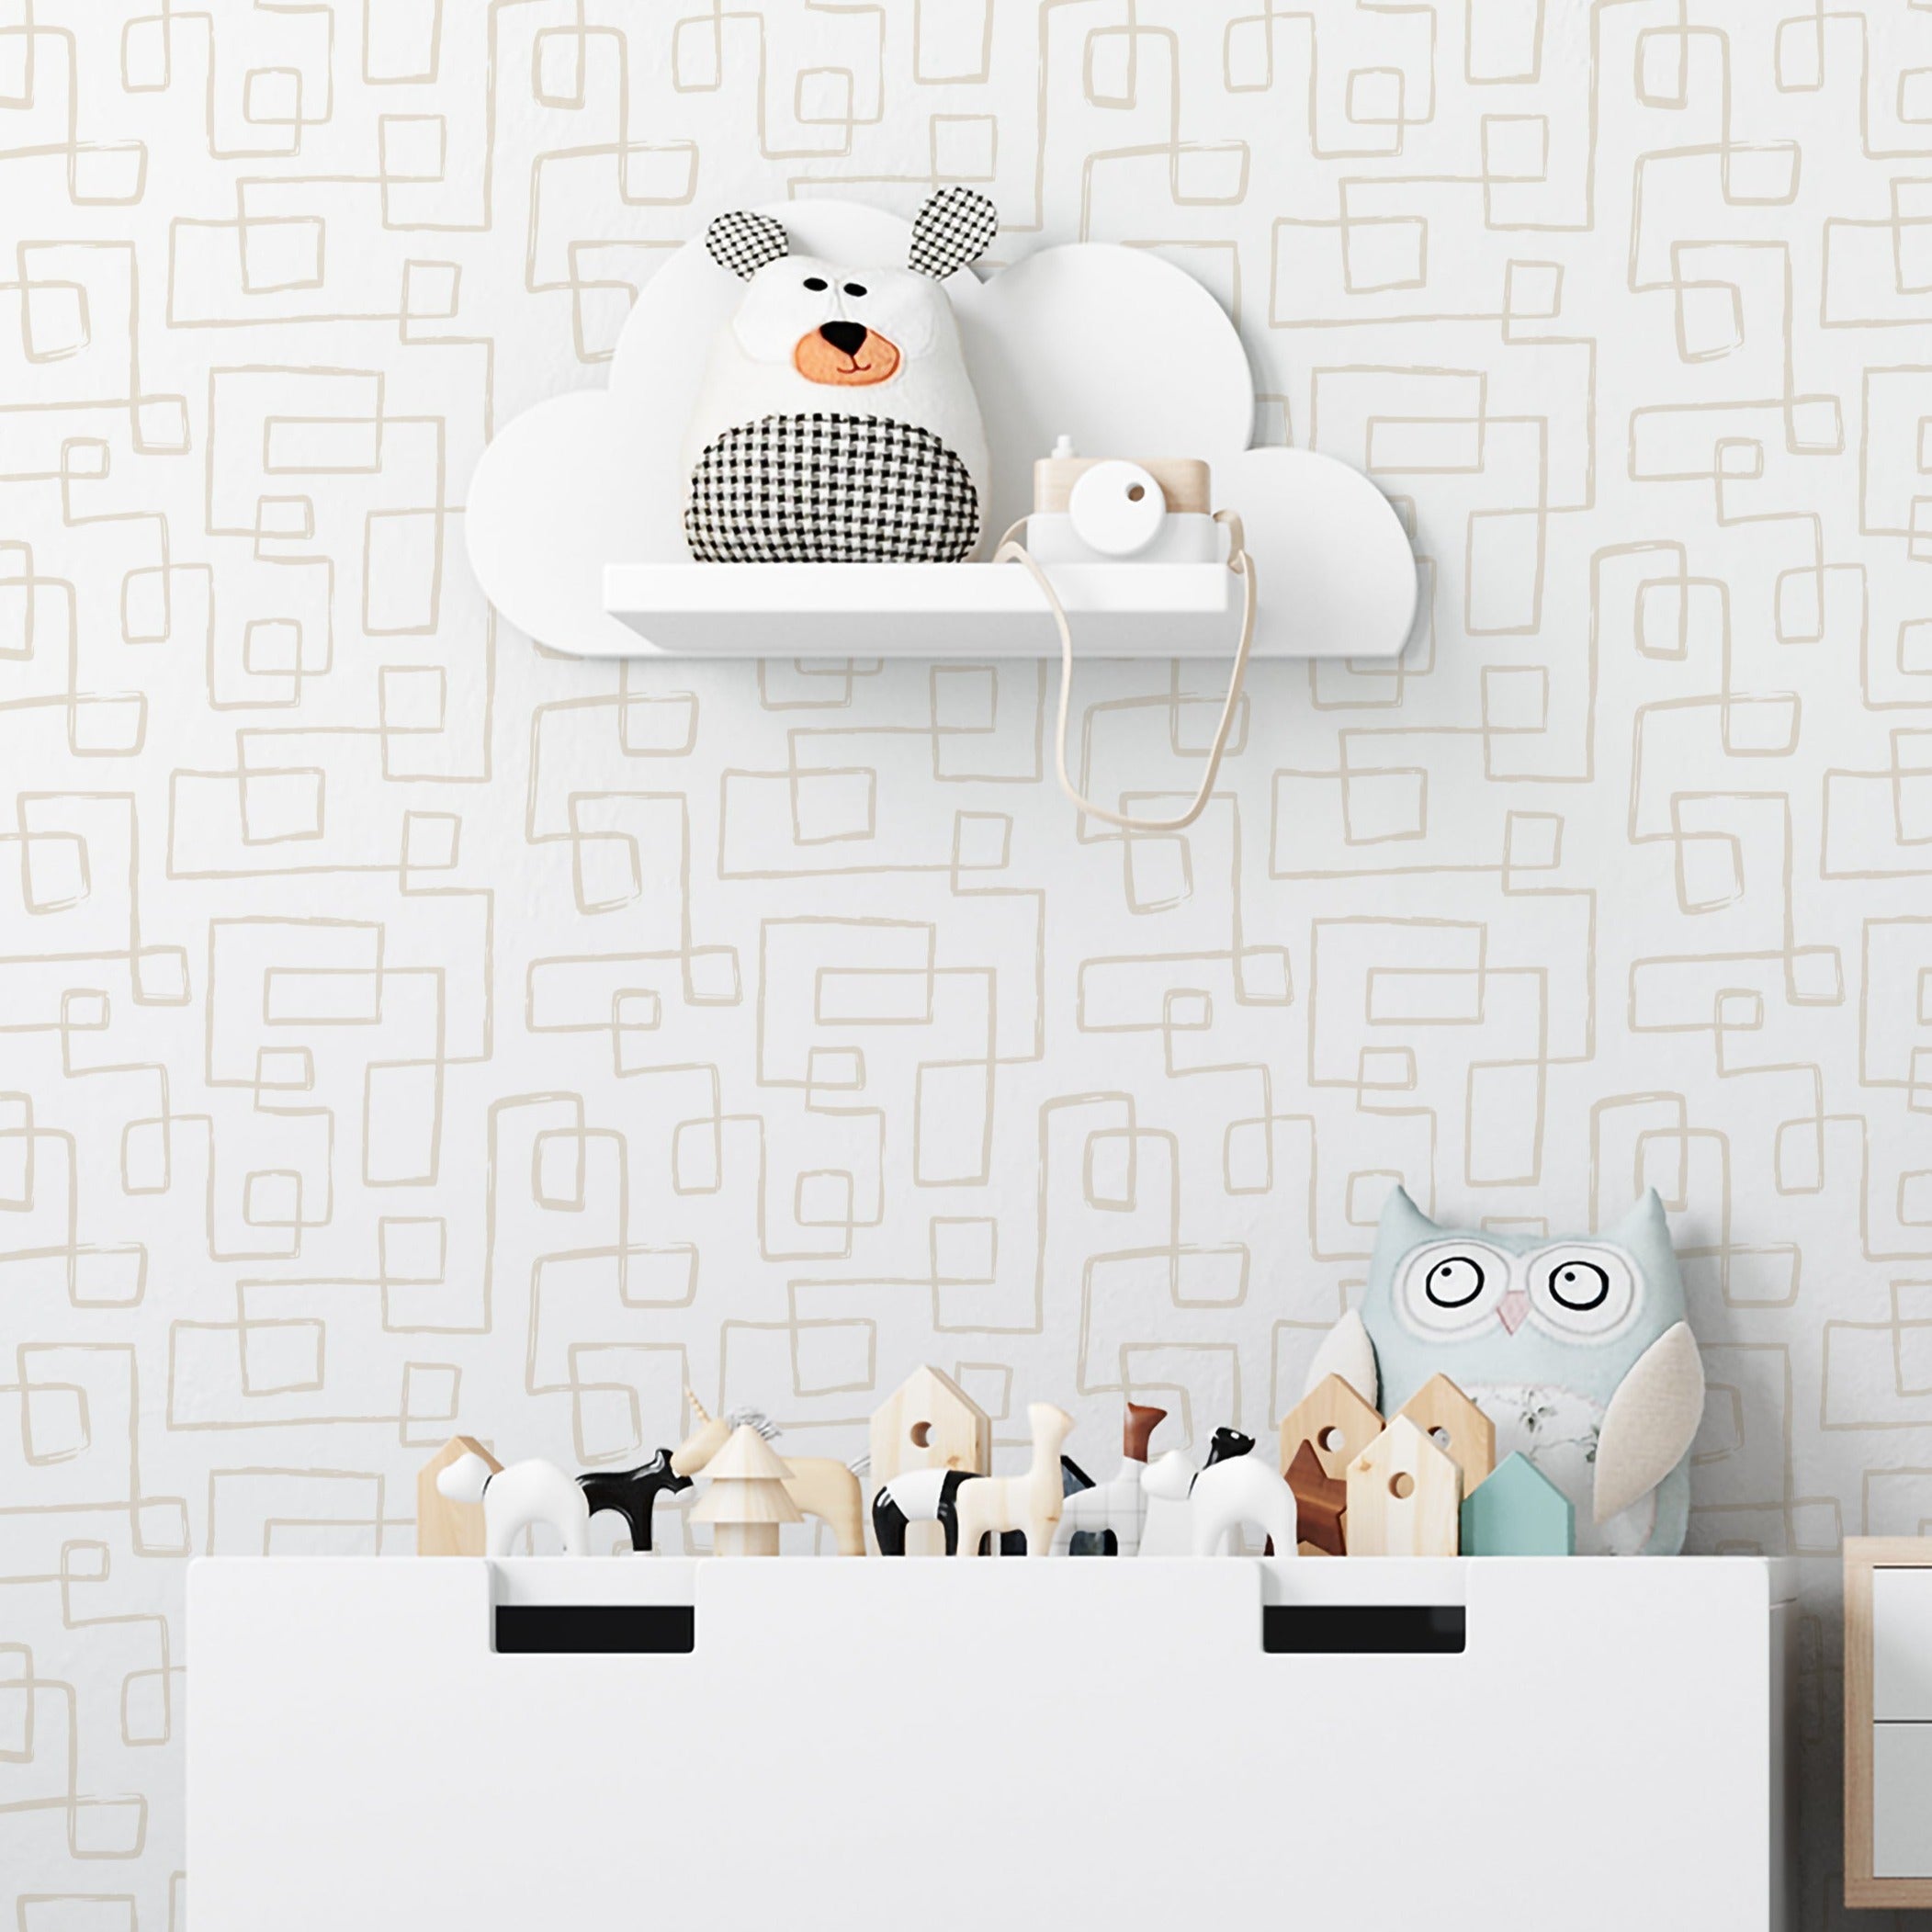 Children's nursery with playful and modern design, featuring a large white toy storage bin with various stuffed animals and a whimsical cloud-shaped shelf on a patterned wallpaper background. The wallpaper has a subtle, abstract geometric pattern in a neutral color palette